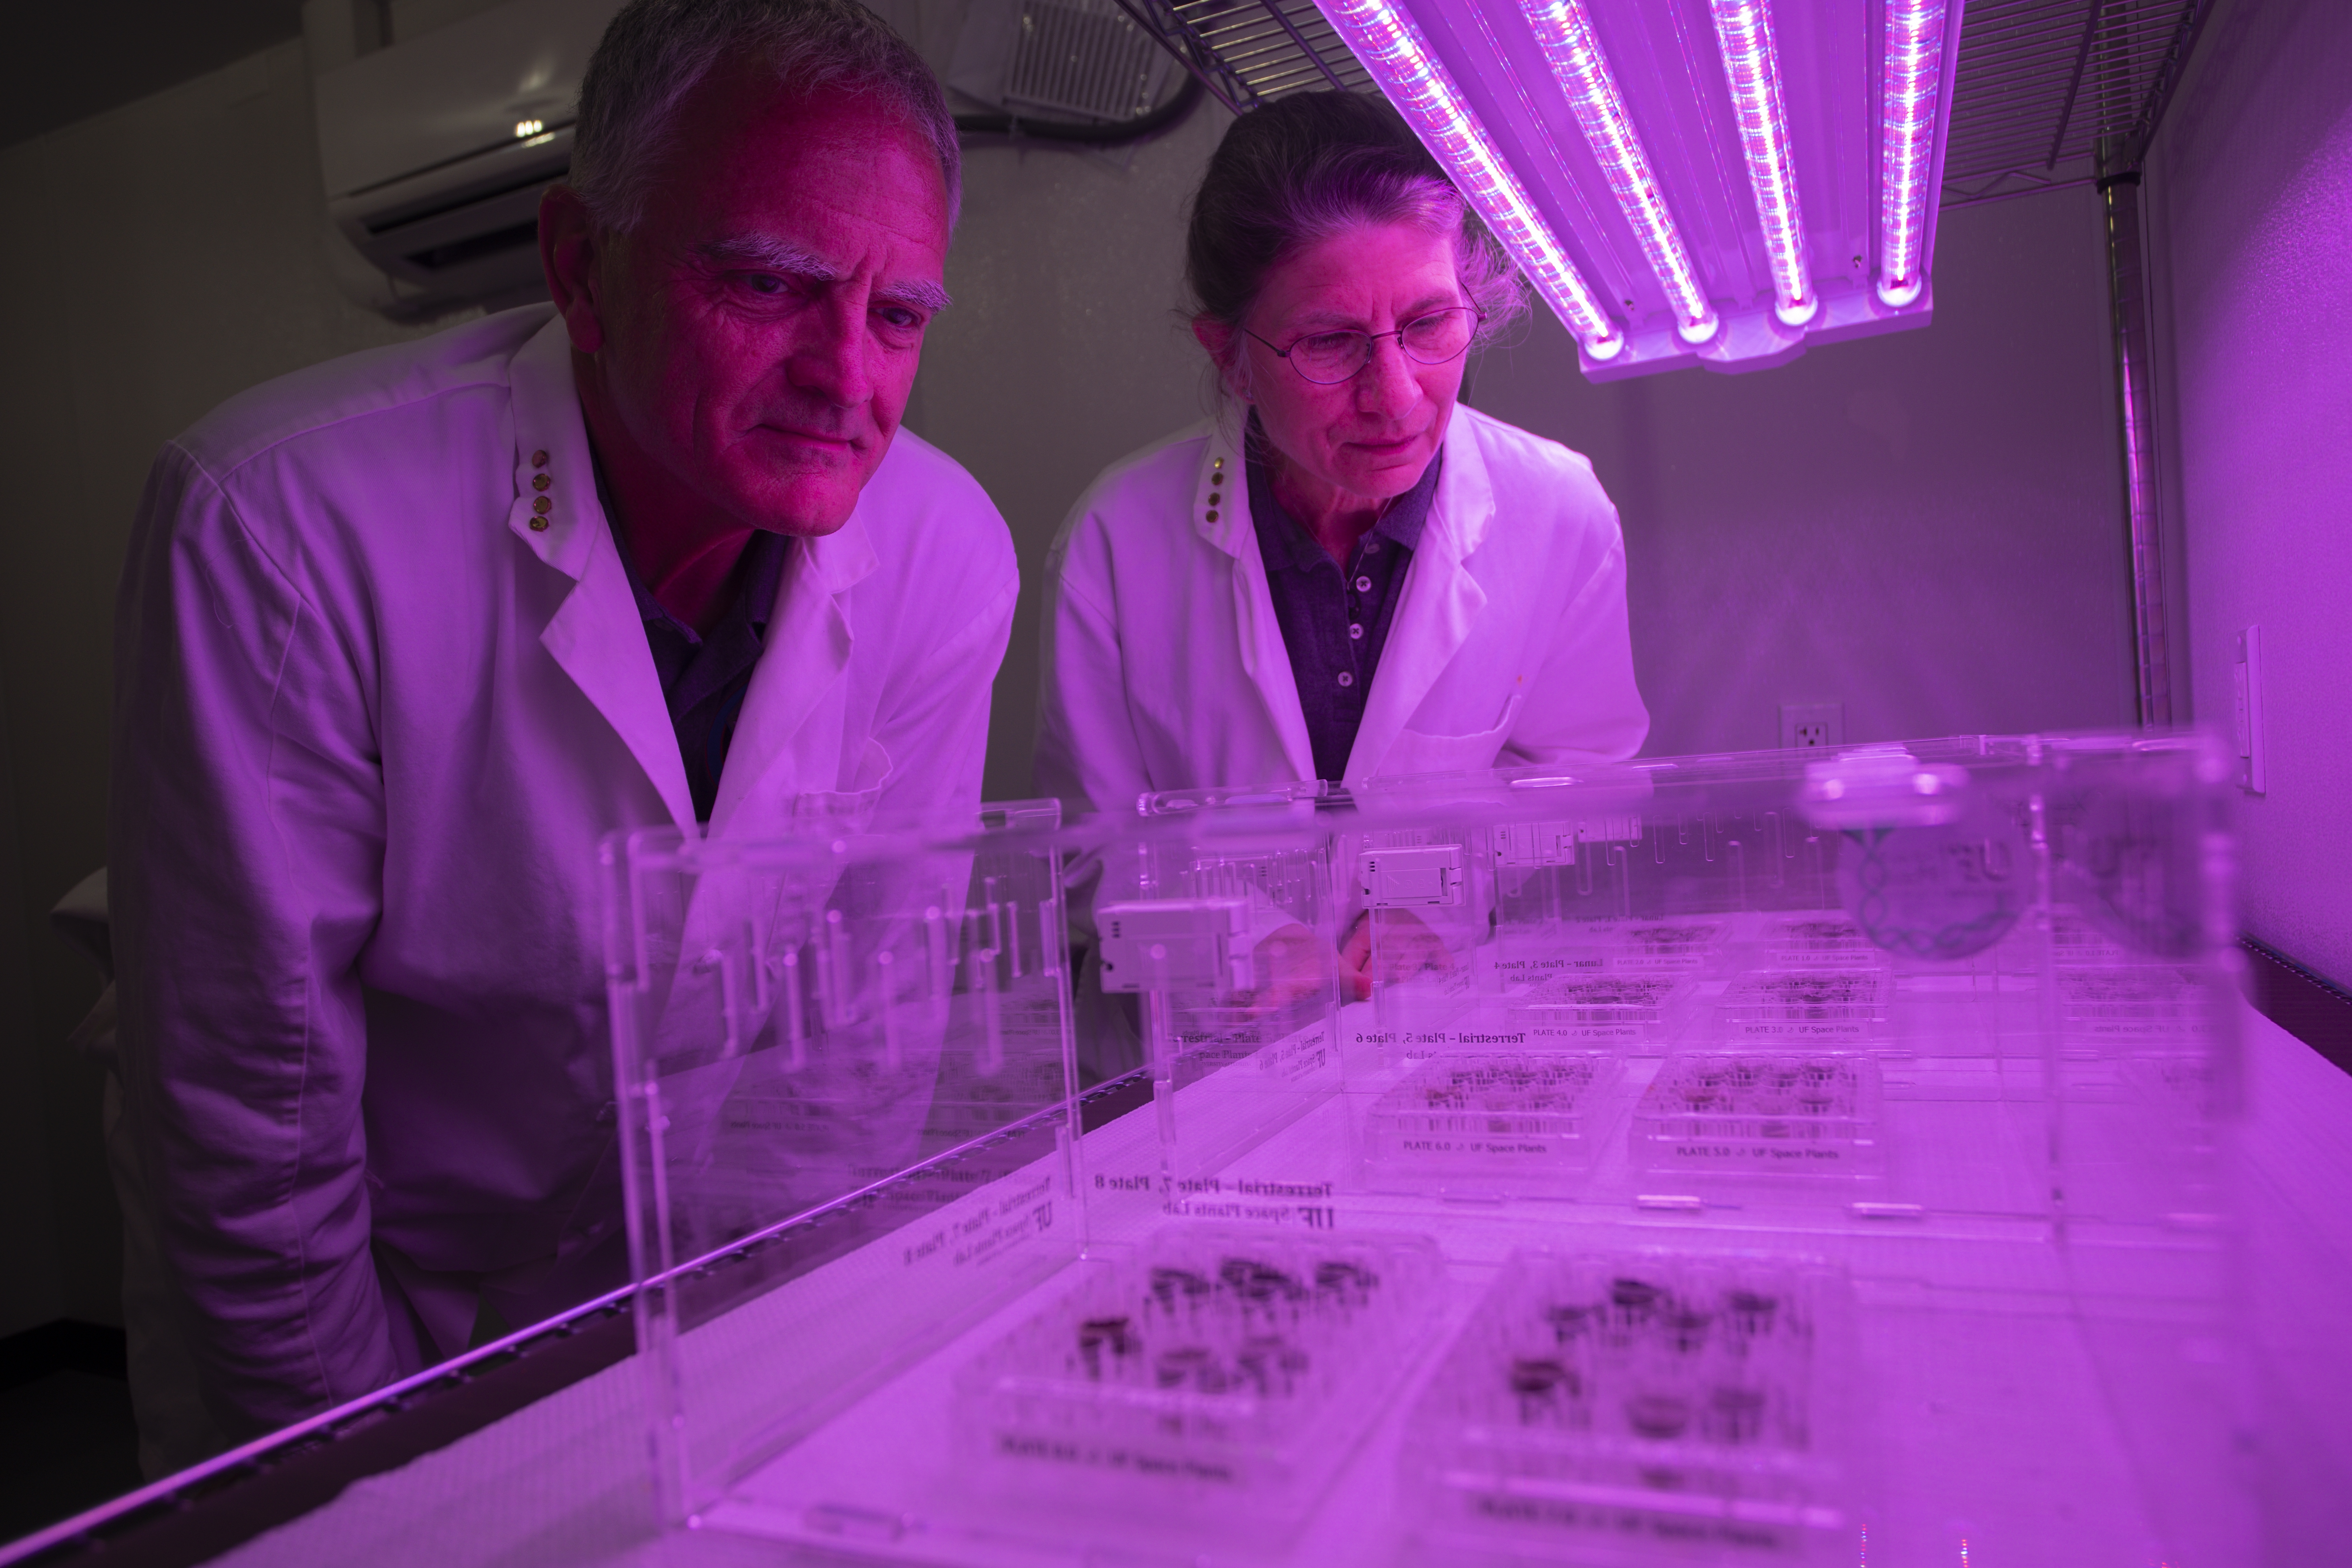 Rob Ferl and Anna-Lisa Paul work on plants in lunar soil in purple light. 